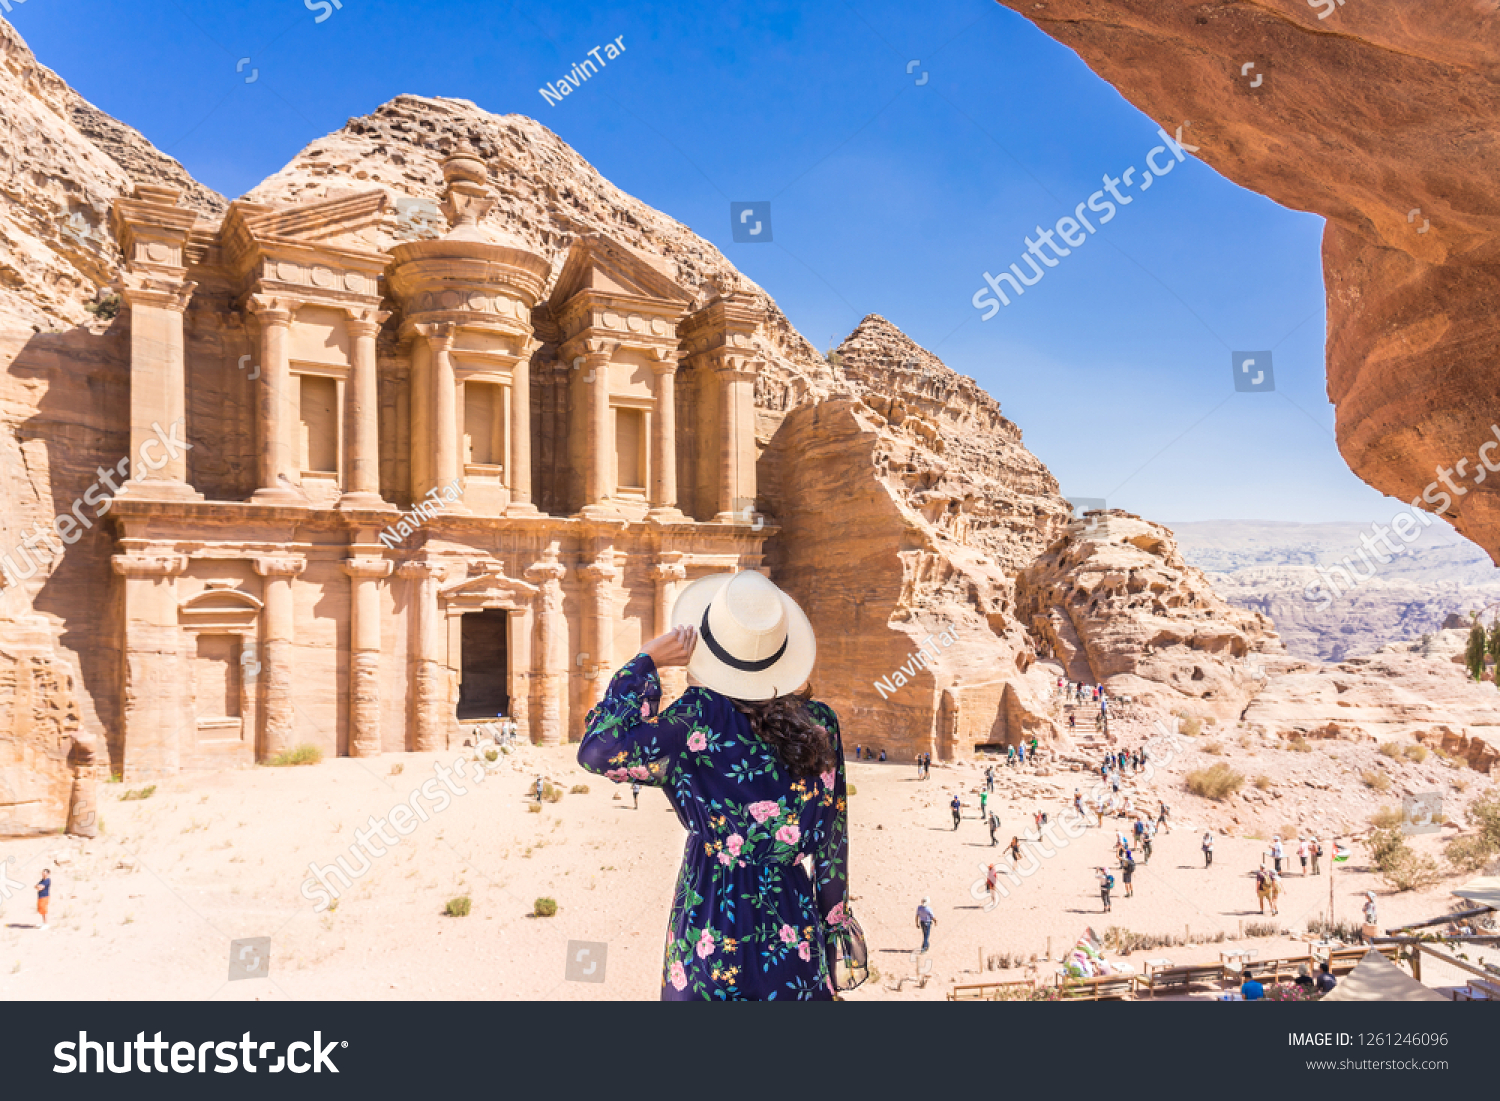 Asian young woman in colorful dress and hat enjoying at The Monastery, Petra's largest monument, UNESCO World Heritage Site, Jordan. #1261246096